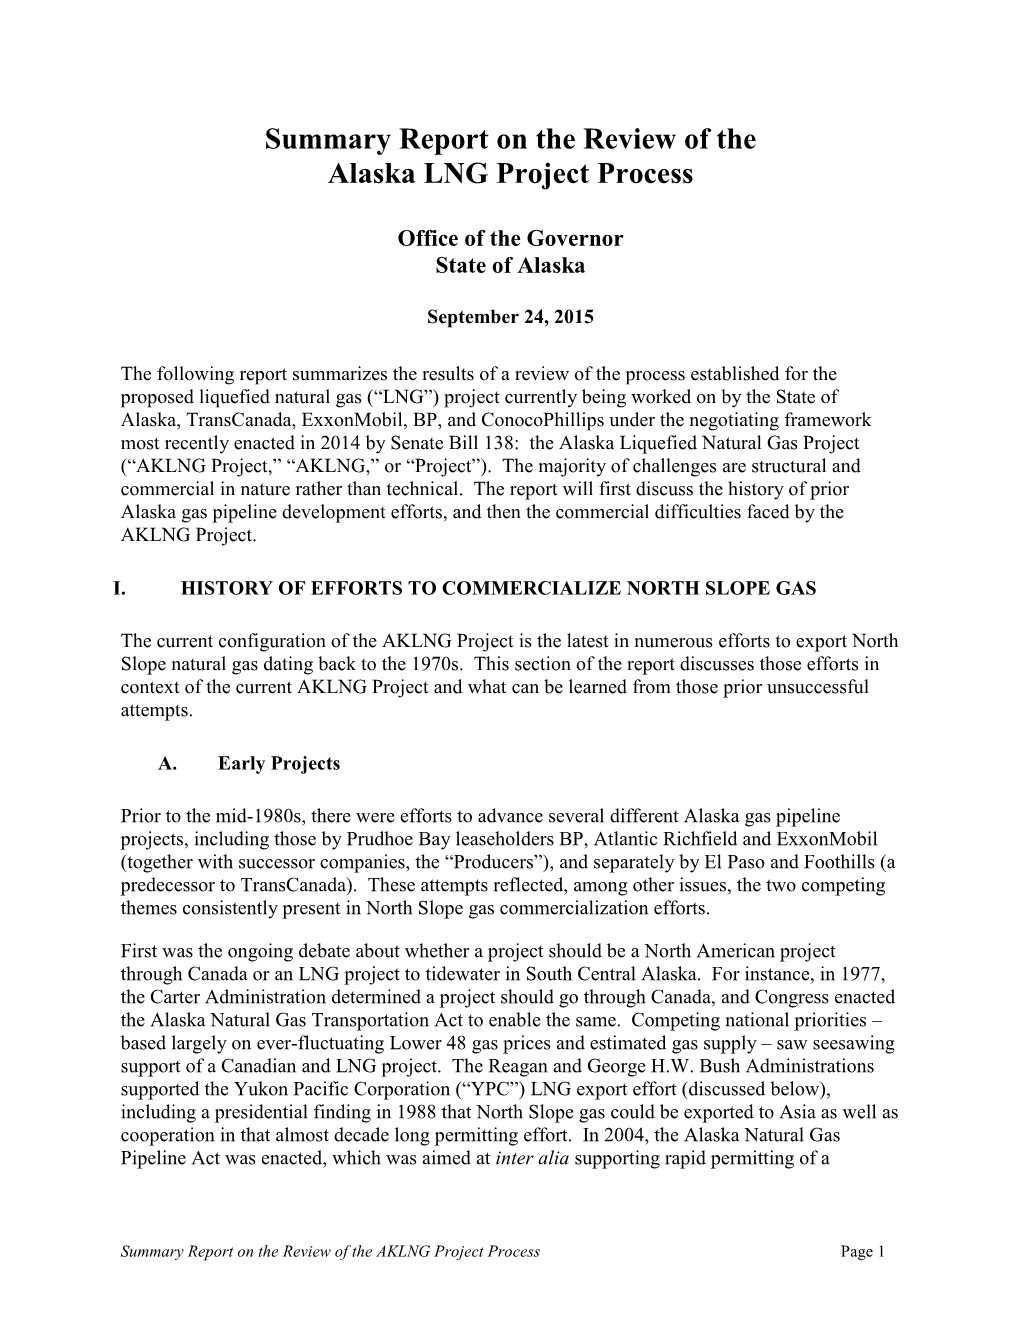 Summary Report on the Review of the Alaska LNG Project Process